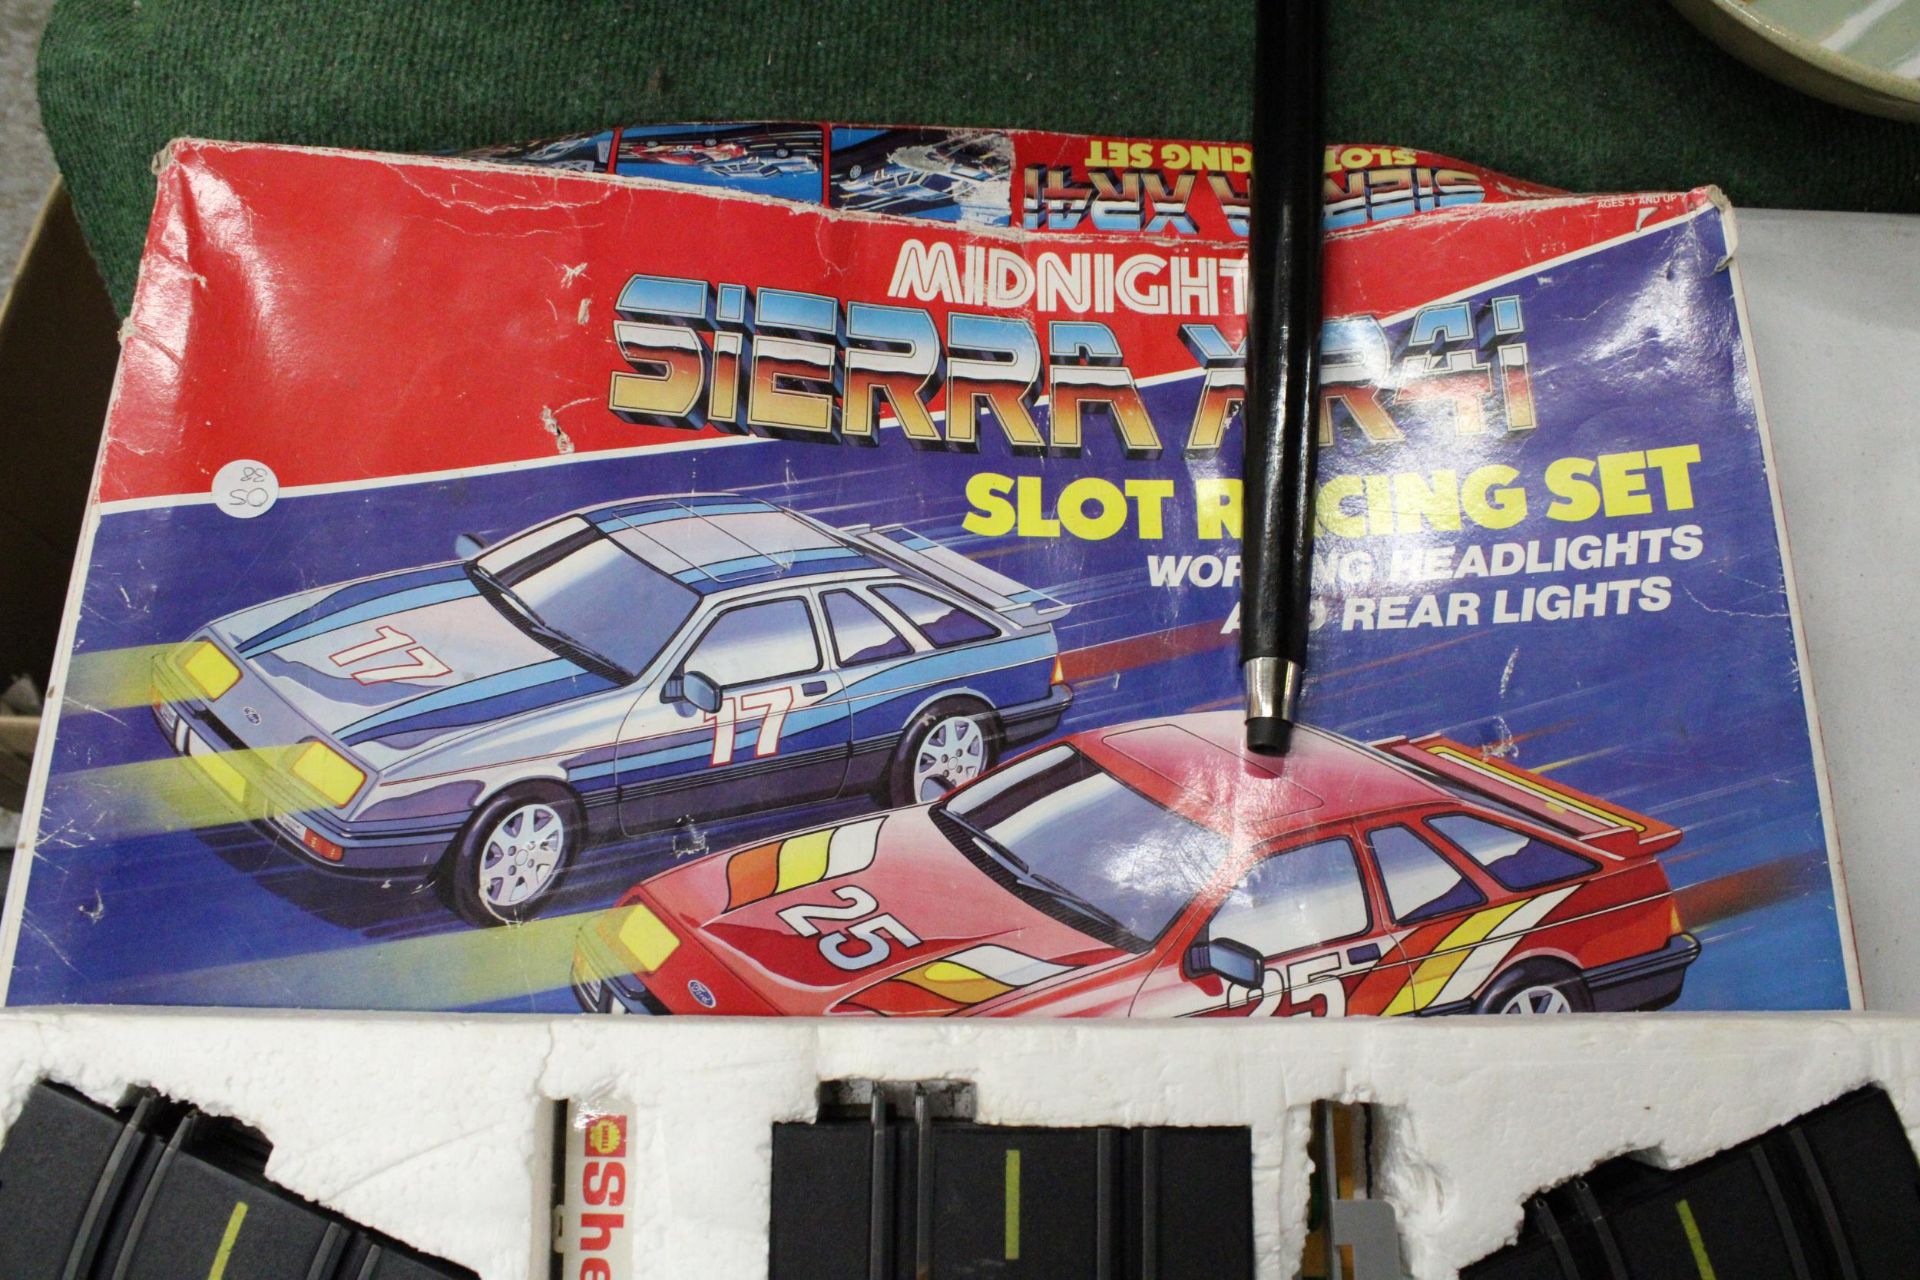 A SIERRA XR4i, RACING GAME WITH ILLUMINATED LIGHTS, BOXED, VENDOR STATES FULL SET, NO WARRANTY GIVEN - Bild 3 aus 6